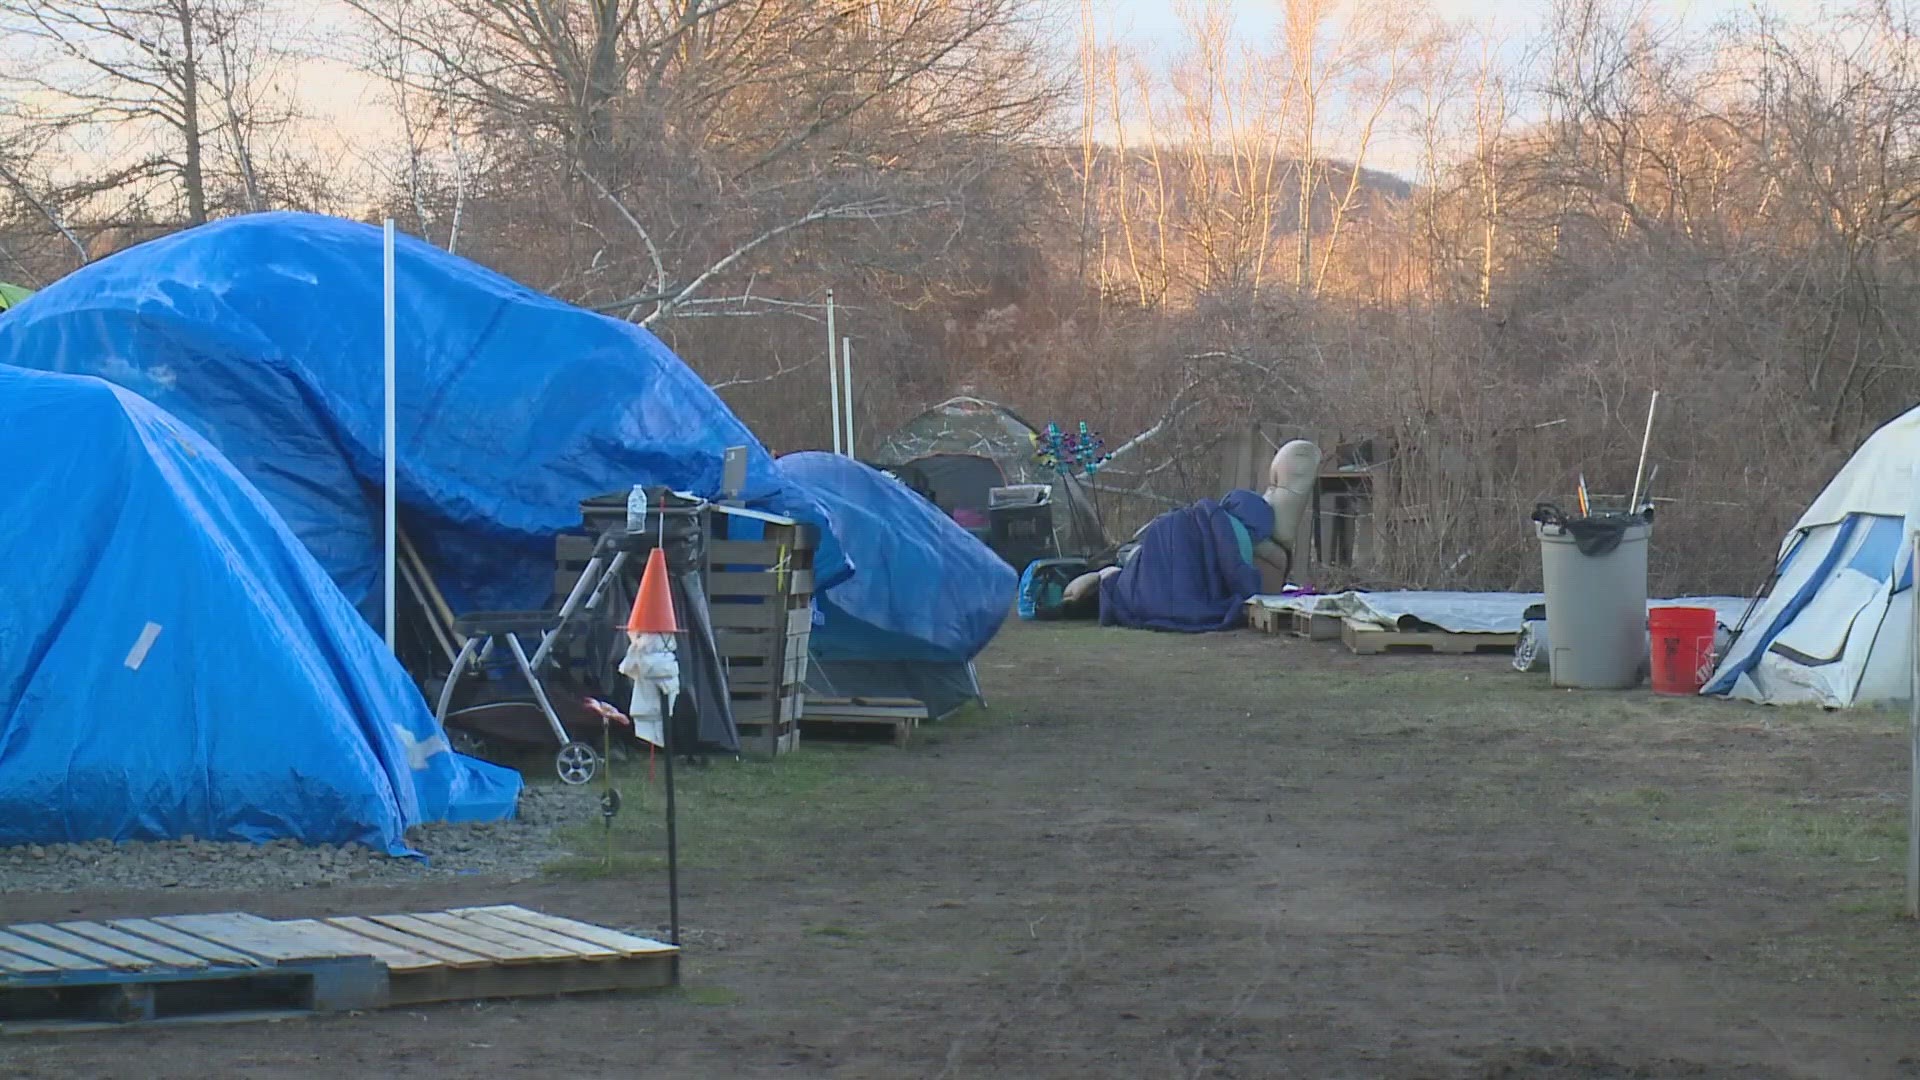 The row of tents and tarps has been in the area for years, but recently problems stemming from the location have caused the city to take action.